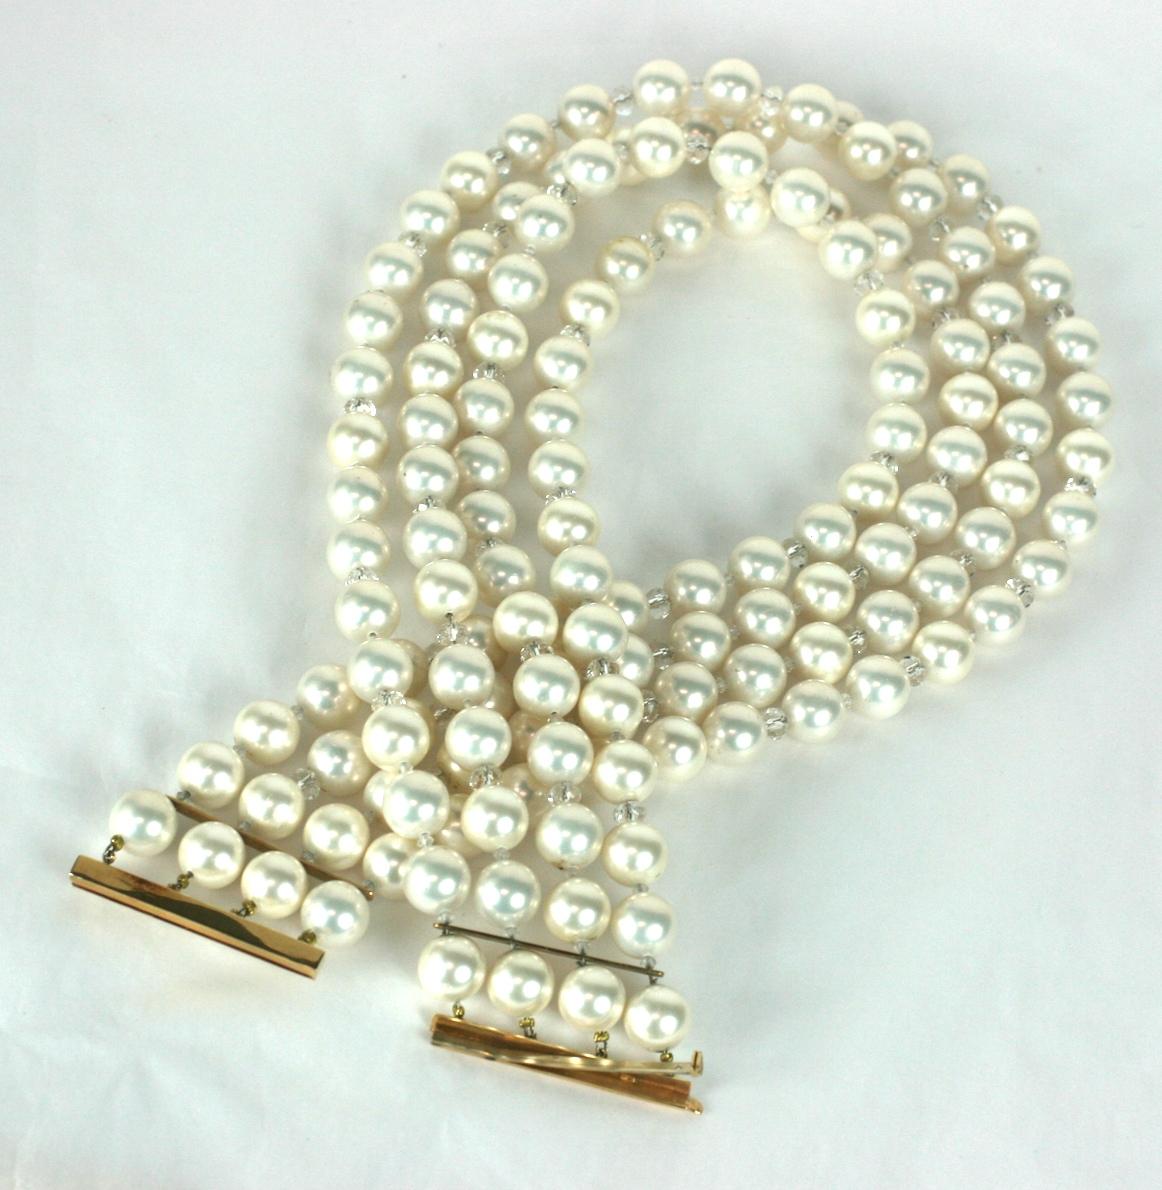 Oversized Faux Pearl and Gold Collar In Excellent Condition For Sale In Riverdale, NY